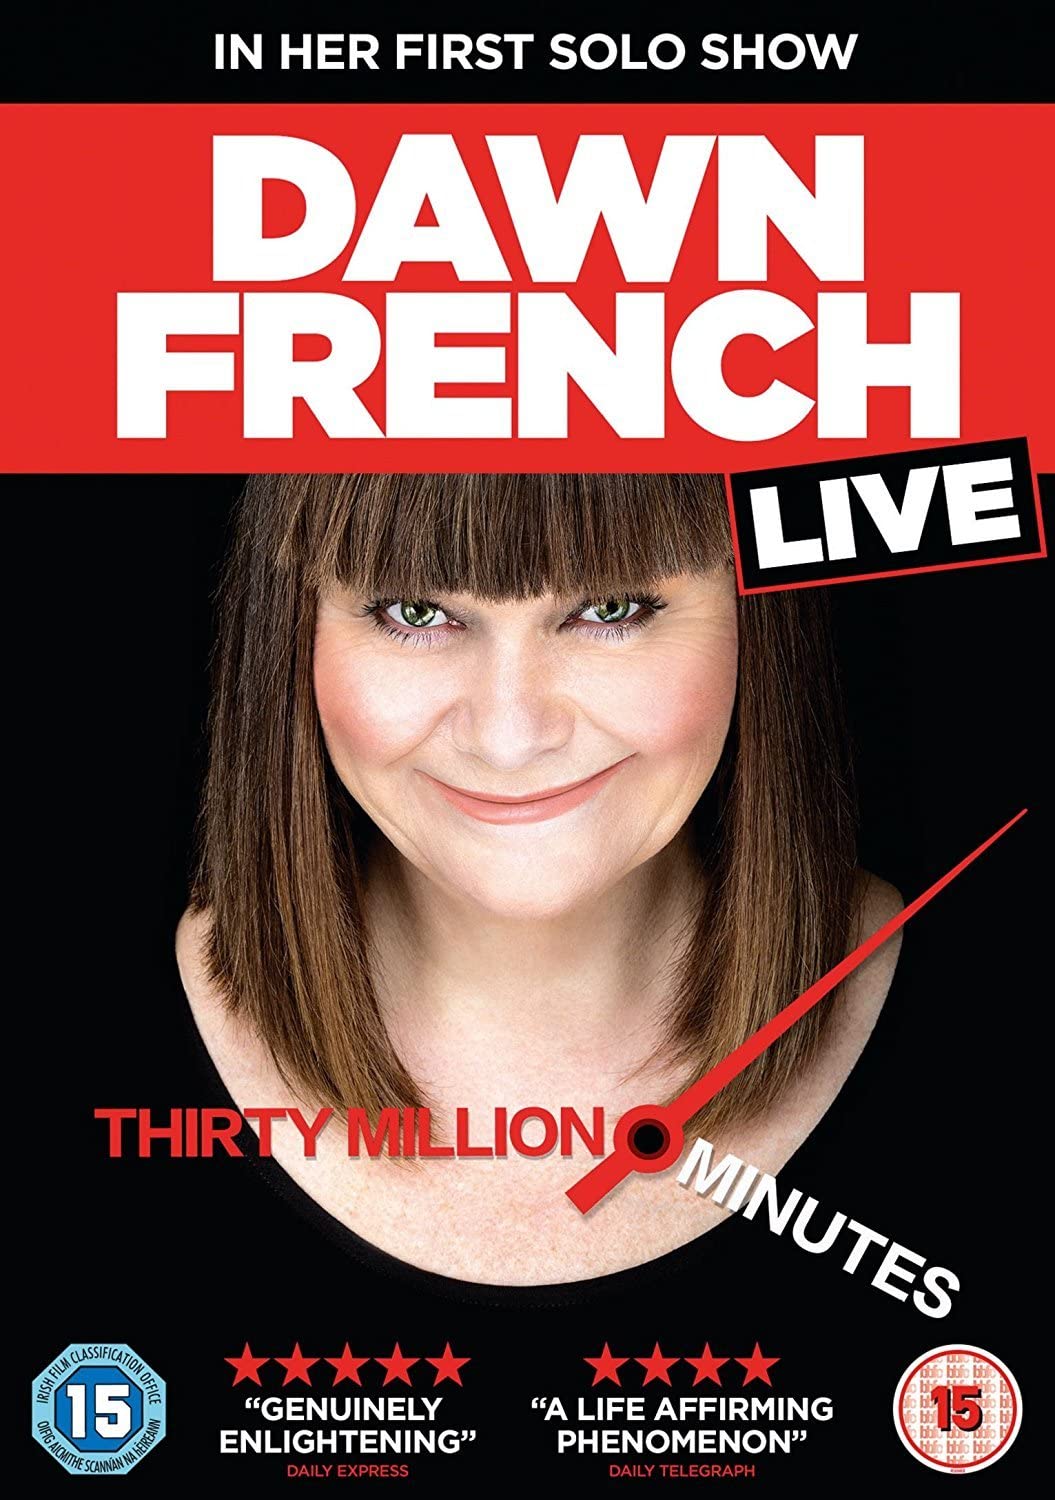 Dawn French Live: Thirty Million Minutes [2017] - Comedy [DVD]